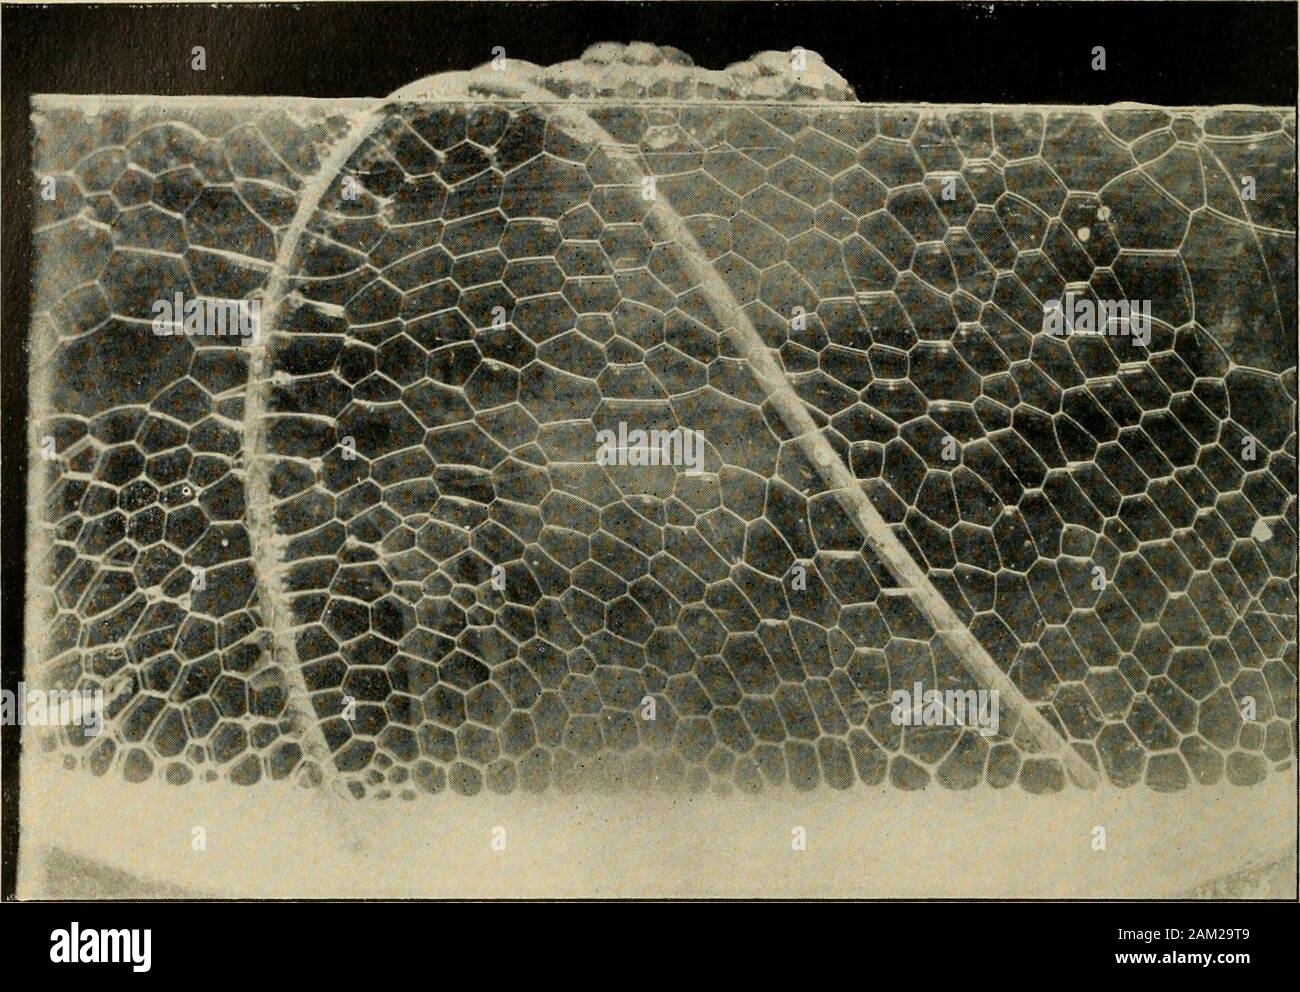 Gleanings in bee culture . NEYCOMB BUILT NEXTTO GLASS—ENLARGED VIEW.The cells are partly tilled with honey. This illus-tration shows that the cells are not straight and horizontal, but curved and slanting upward. the suitability of the fatting-coopis vindicated.— (Jlieshire. On the inner side of the eightplates lining the lower side of theabdomen are about 140,000 glands(Cheshire), from which thewax issecreted as a white liquid, whichhardens on exposure to the air.When first formed it is white andvery brittle, and is pulled outfrom between the plates by thepinceis on the hind legs. Thepieces o Stock Photo